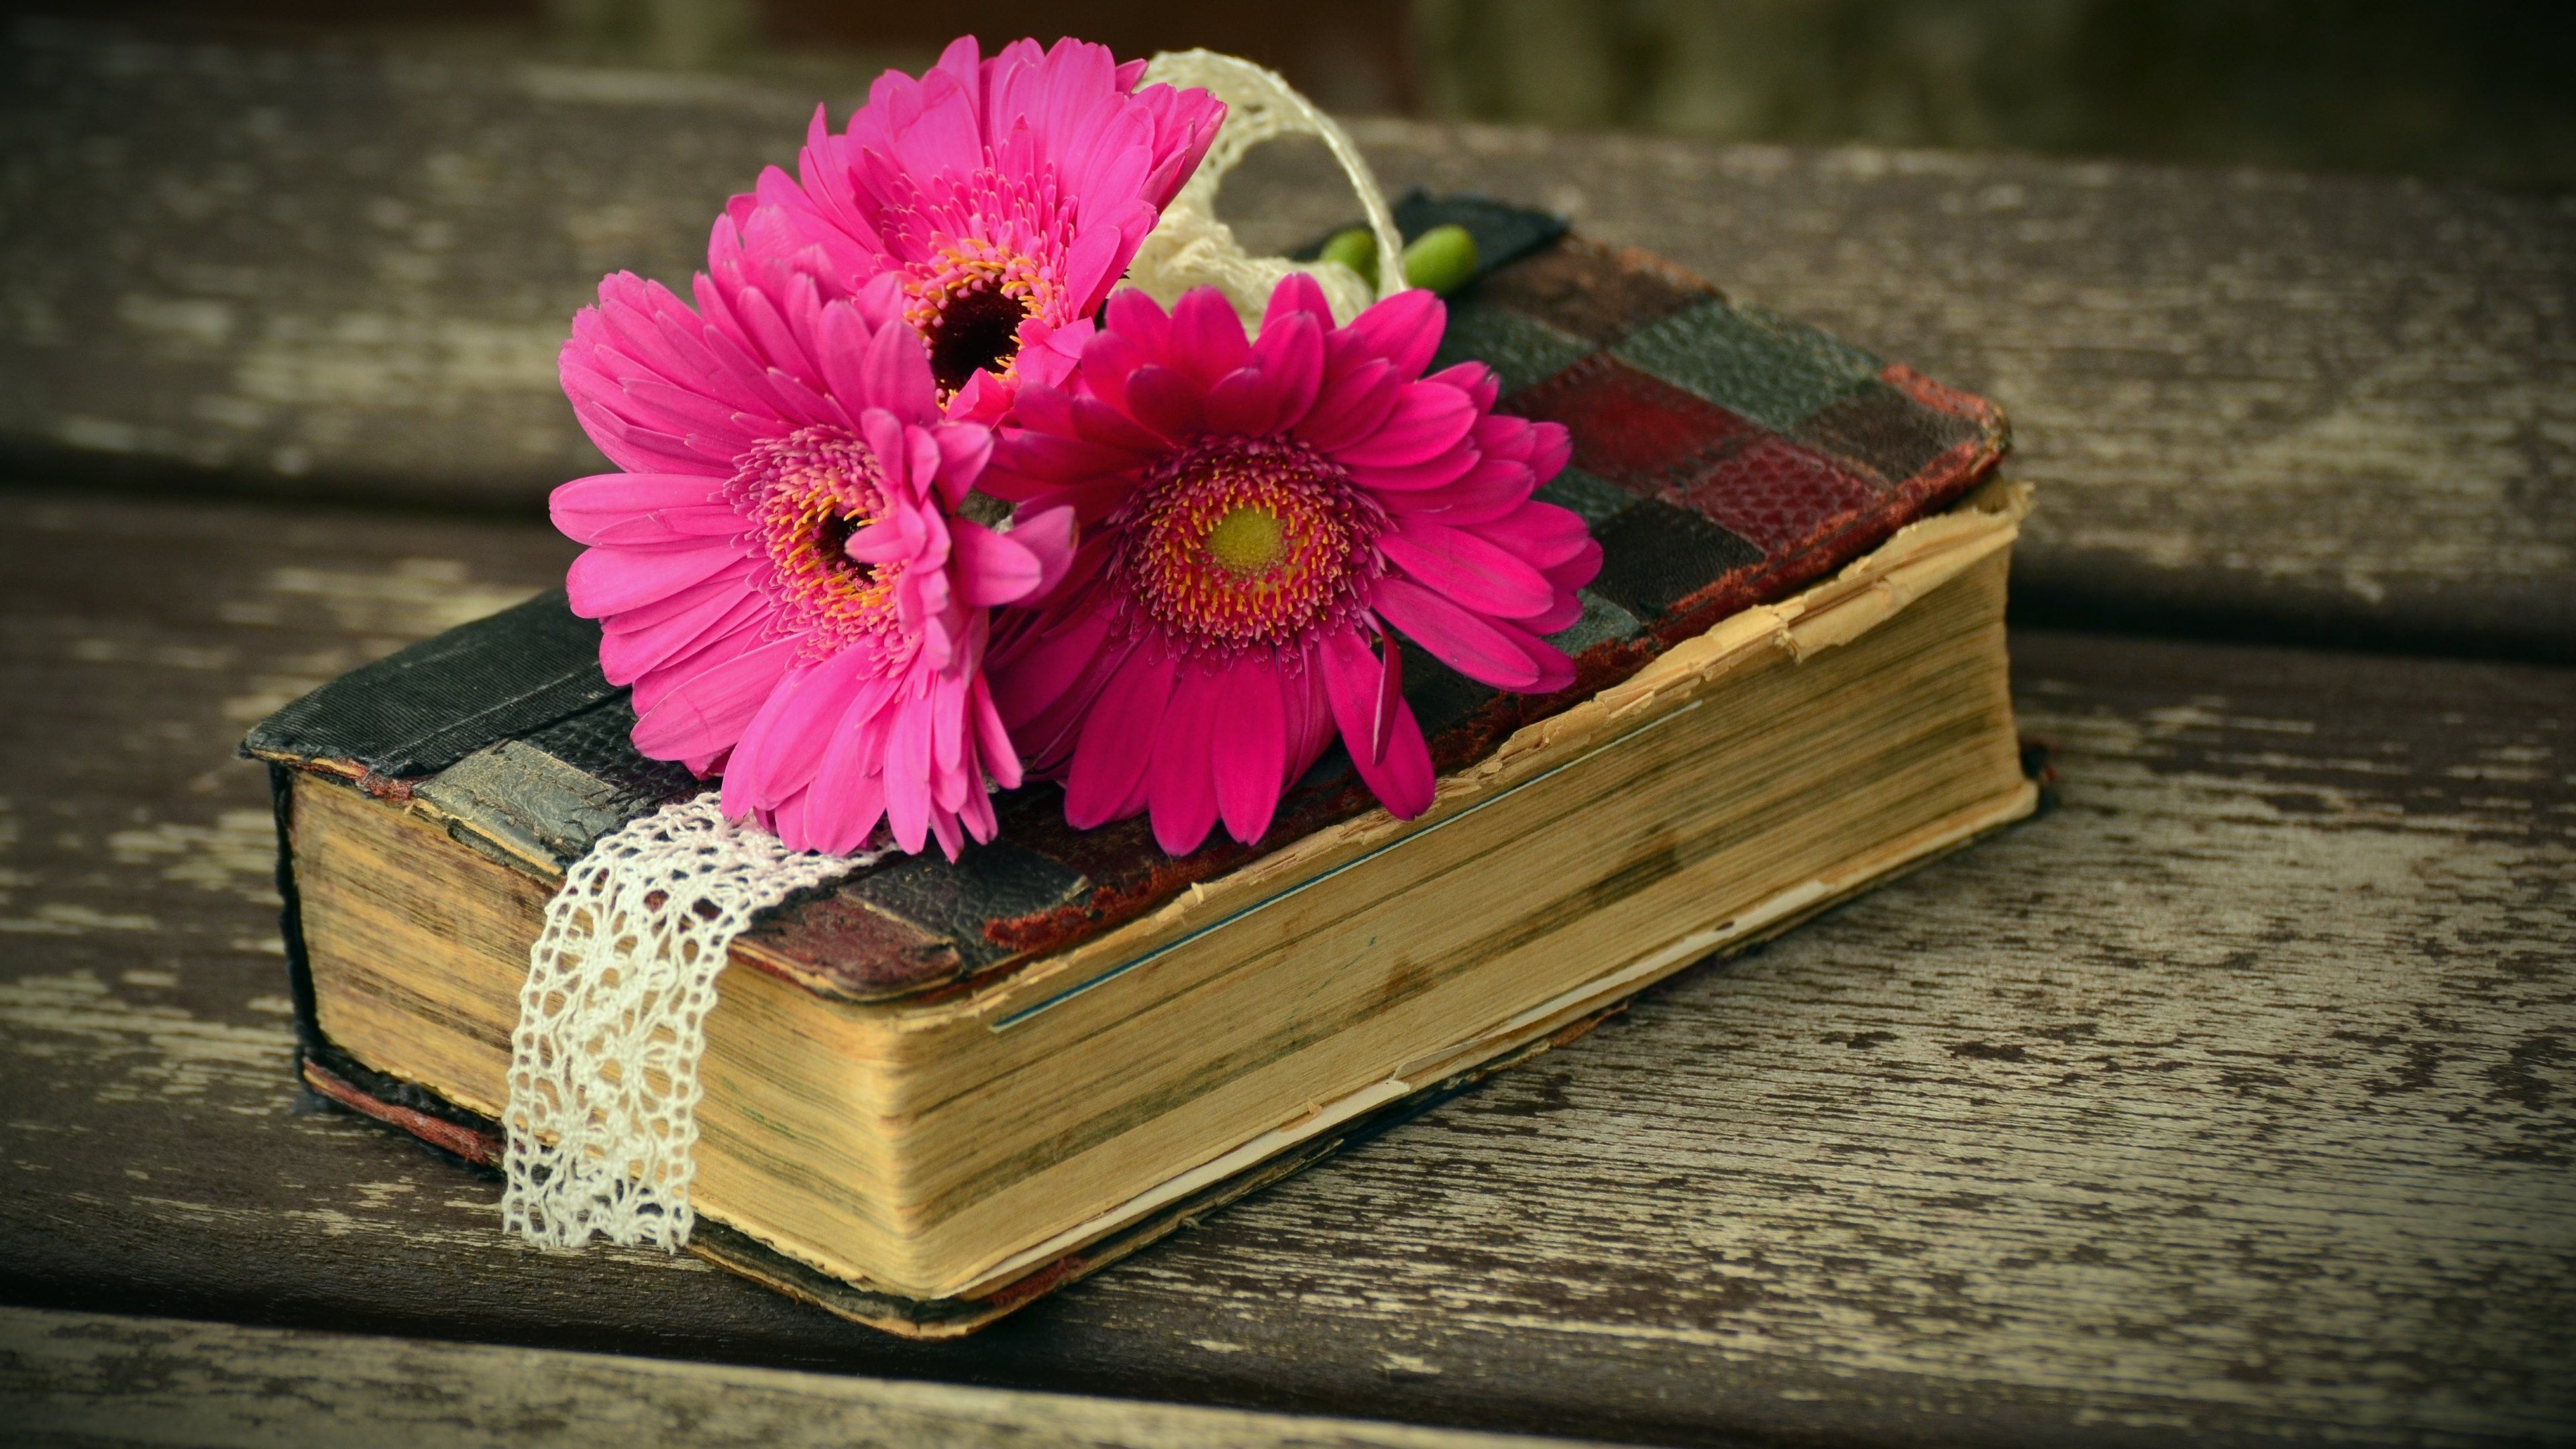 Blooming pages, Floral bookmarks, Bookish beauty, Bibliophile's delight, 3840x2160 4K Desktop